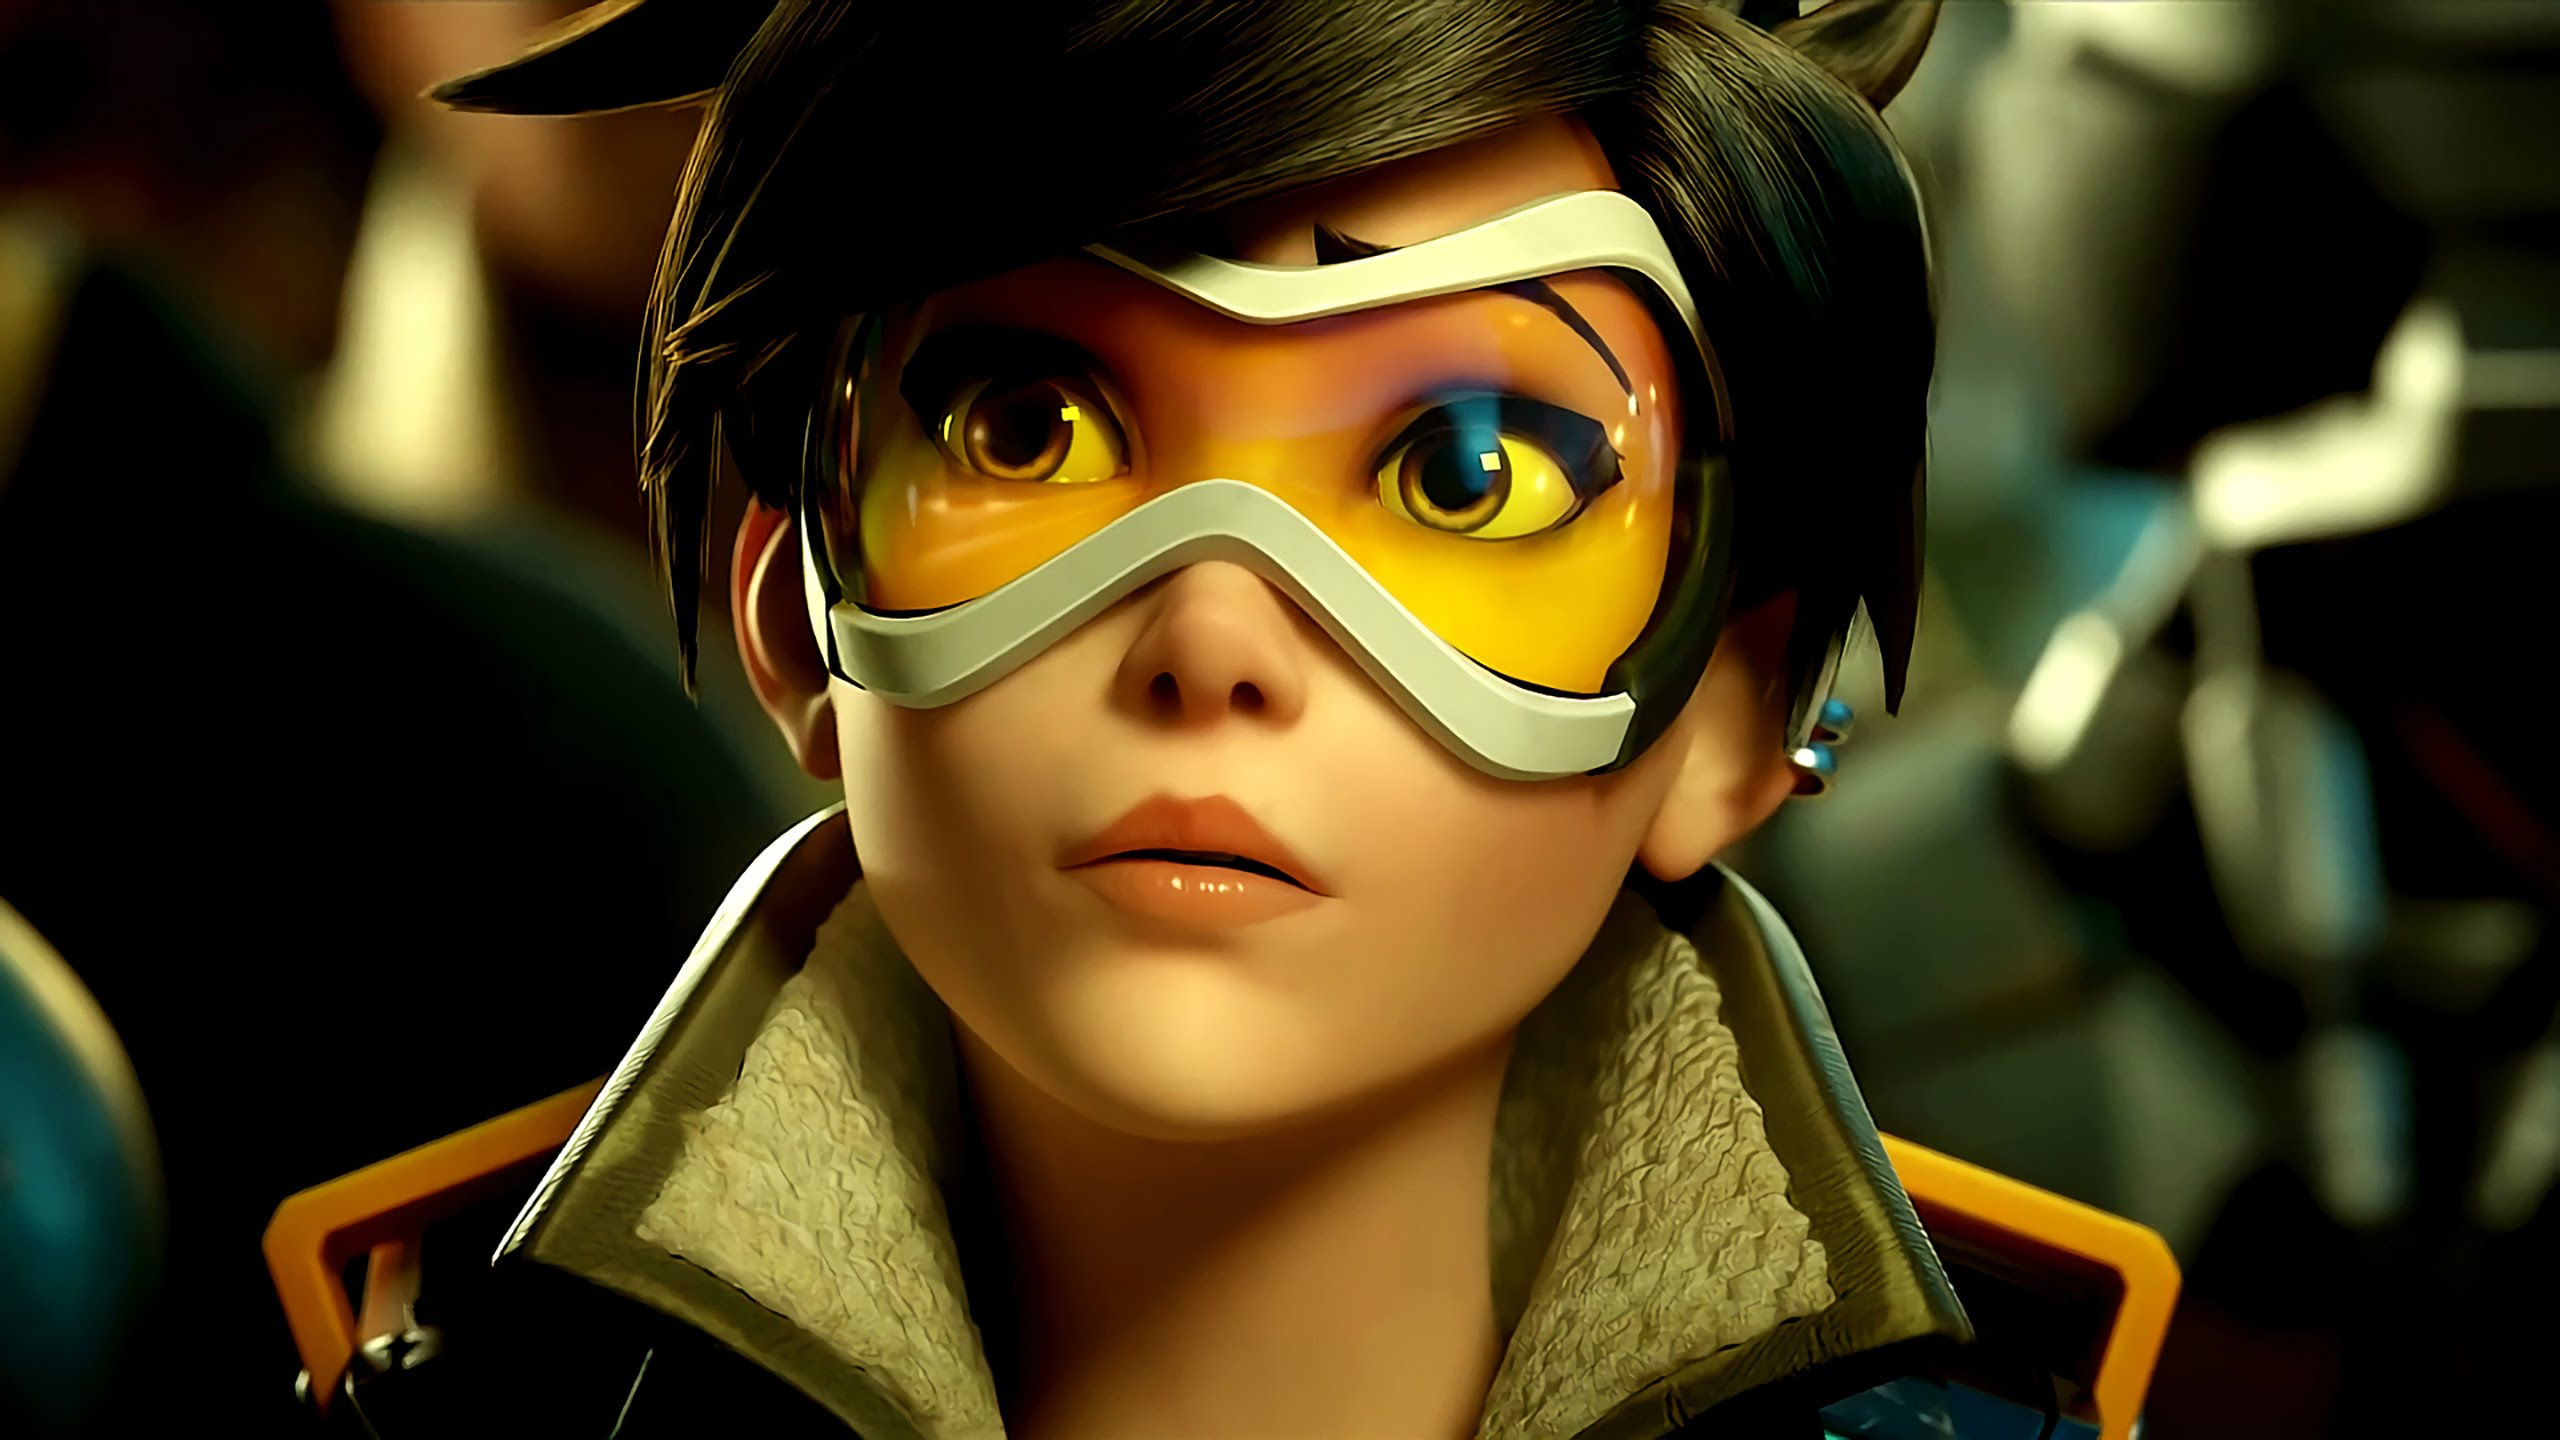 General 2560x1440 Tracer (Overwatch) Overwatch Blizzard Entertainment video game characters video game girls face dark hair goggles PC gaming closeup